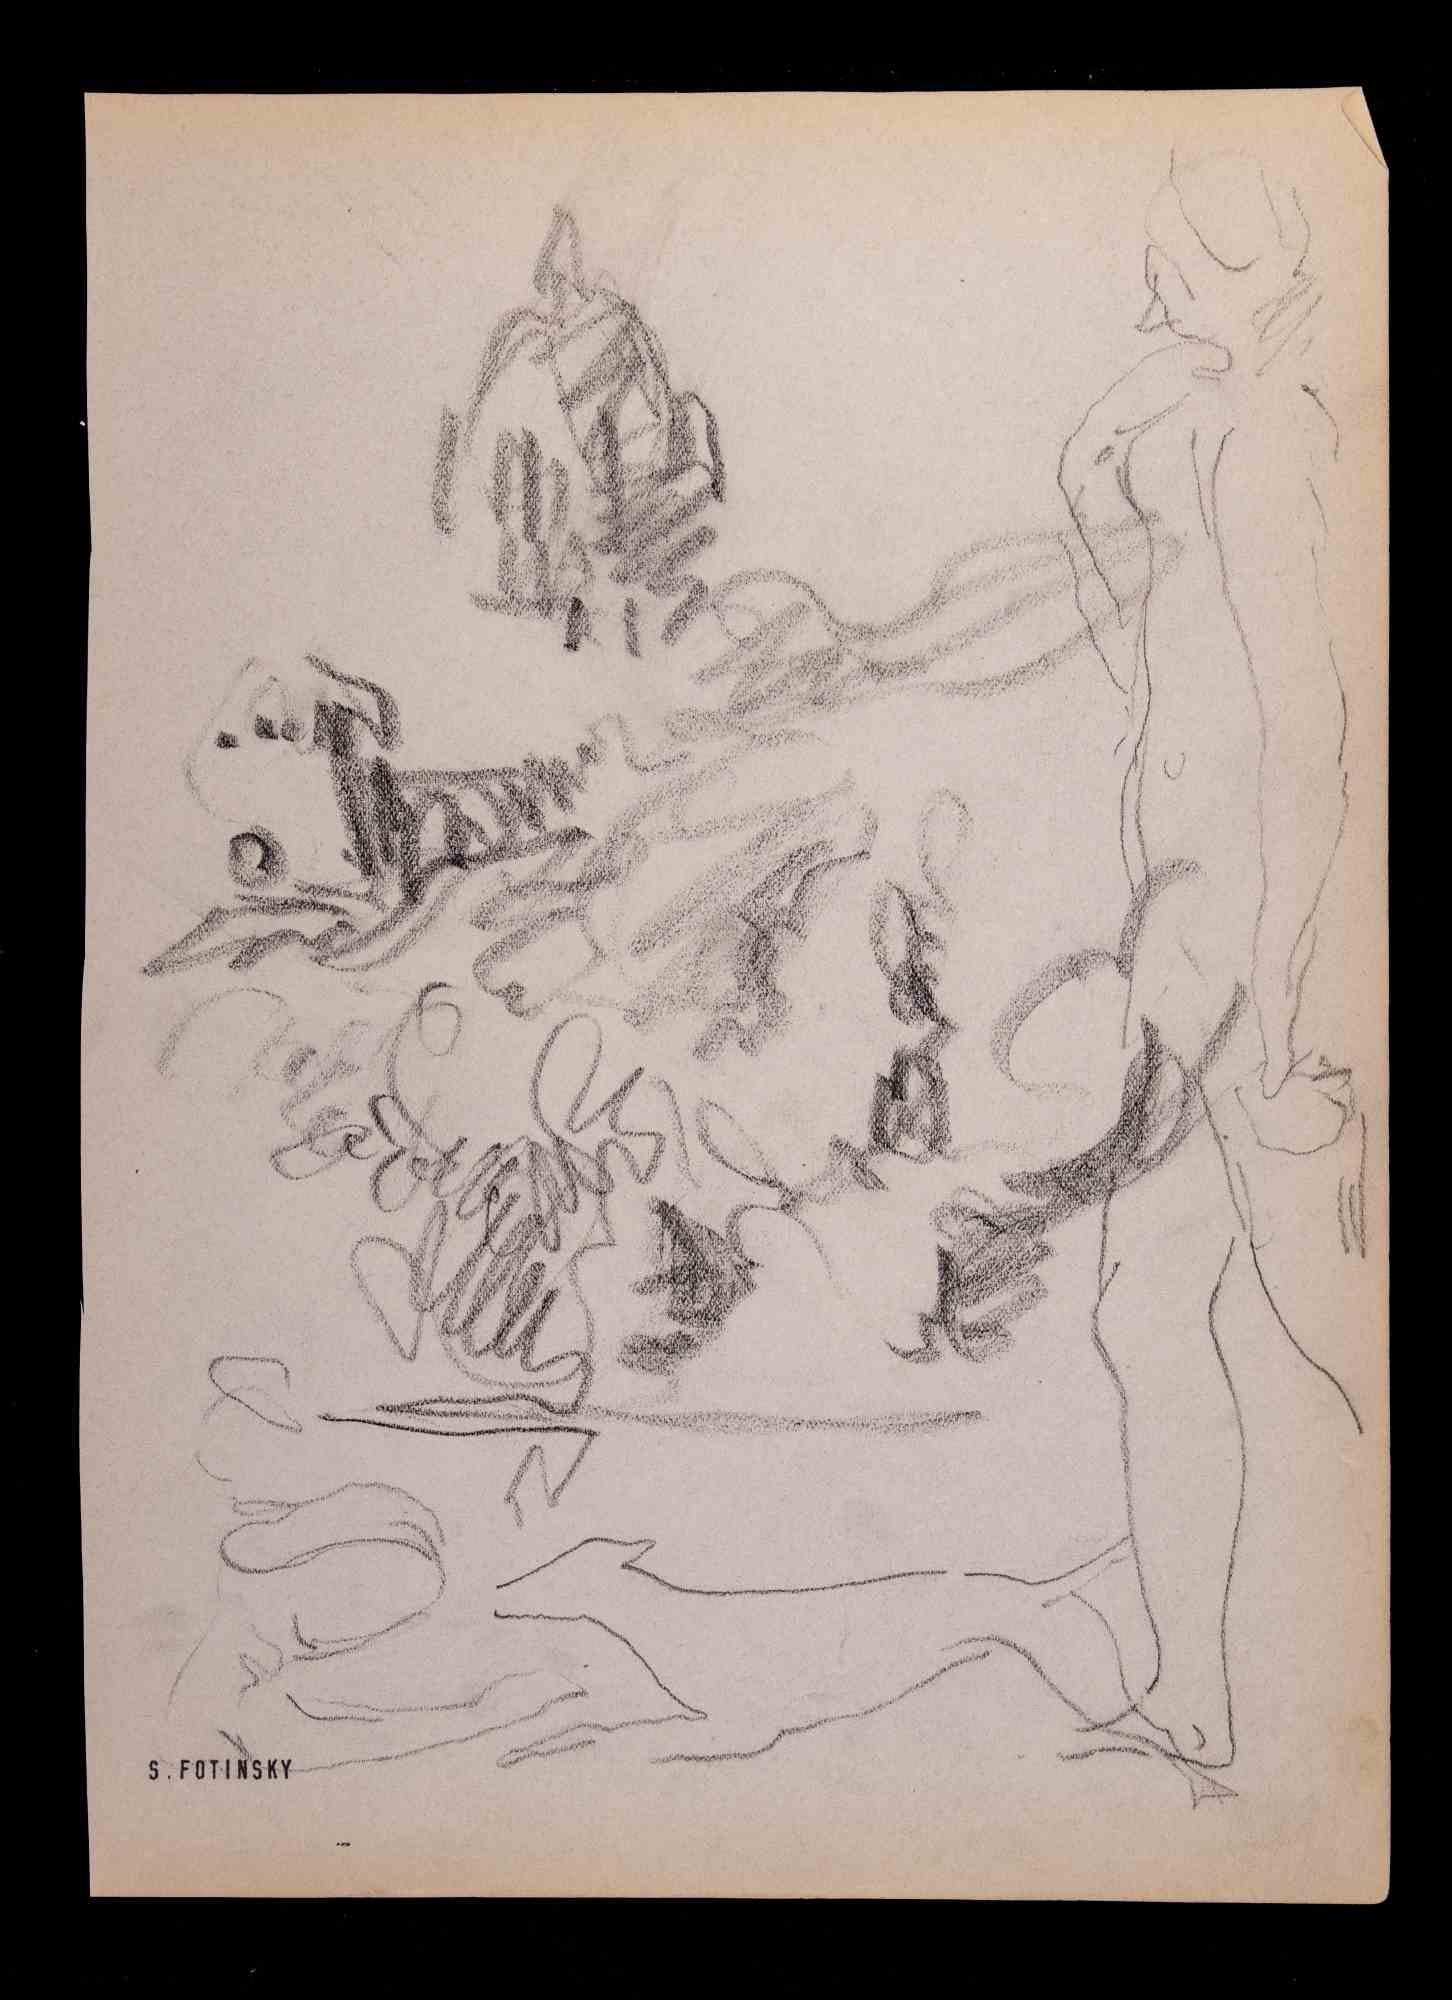 Sketch is an artwork realized by Serge Fotisnky (1887-1971) , in the Mid-20th Century. 

Drawing in Charcoal.

Stam-signed

Good conditions except some yellowing due by time.